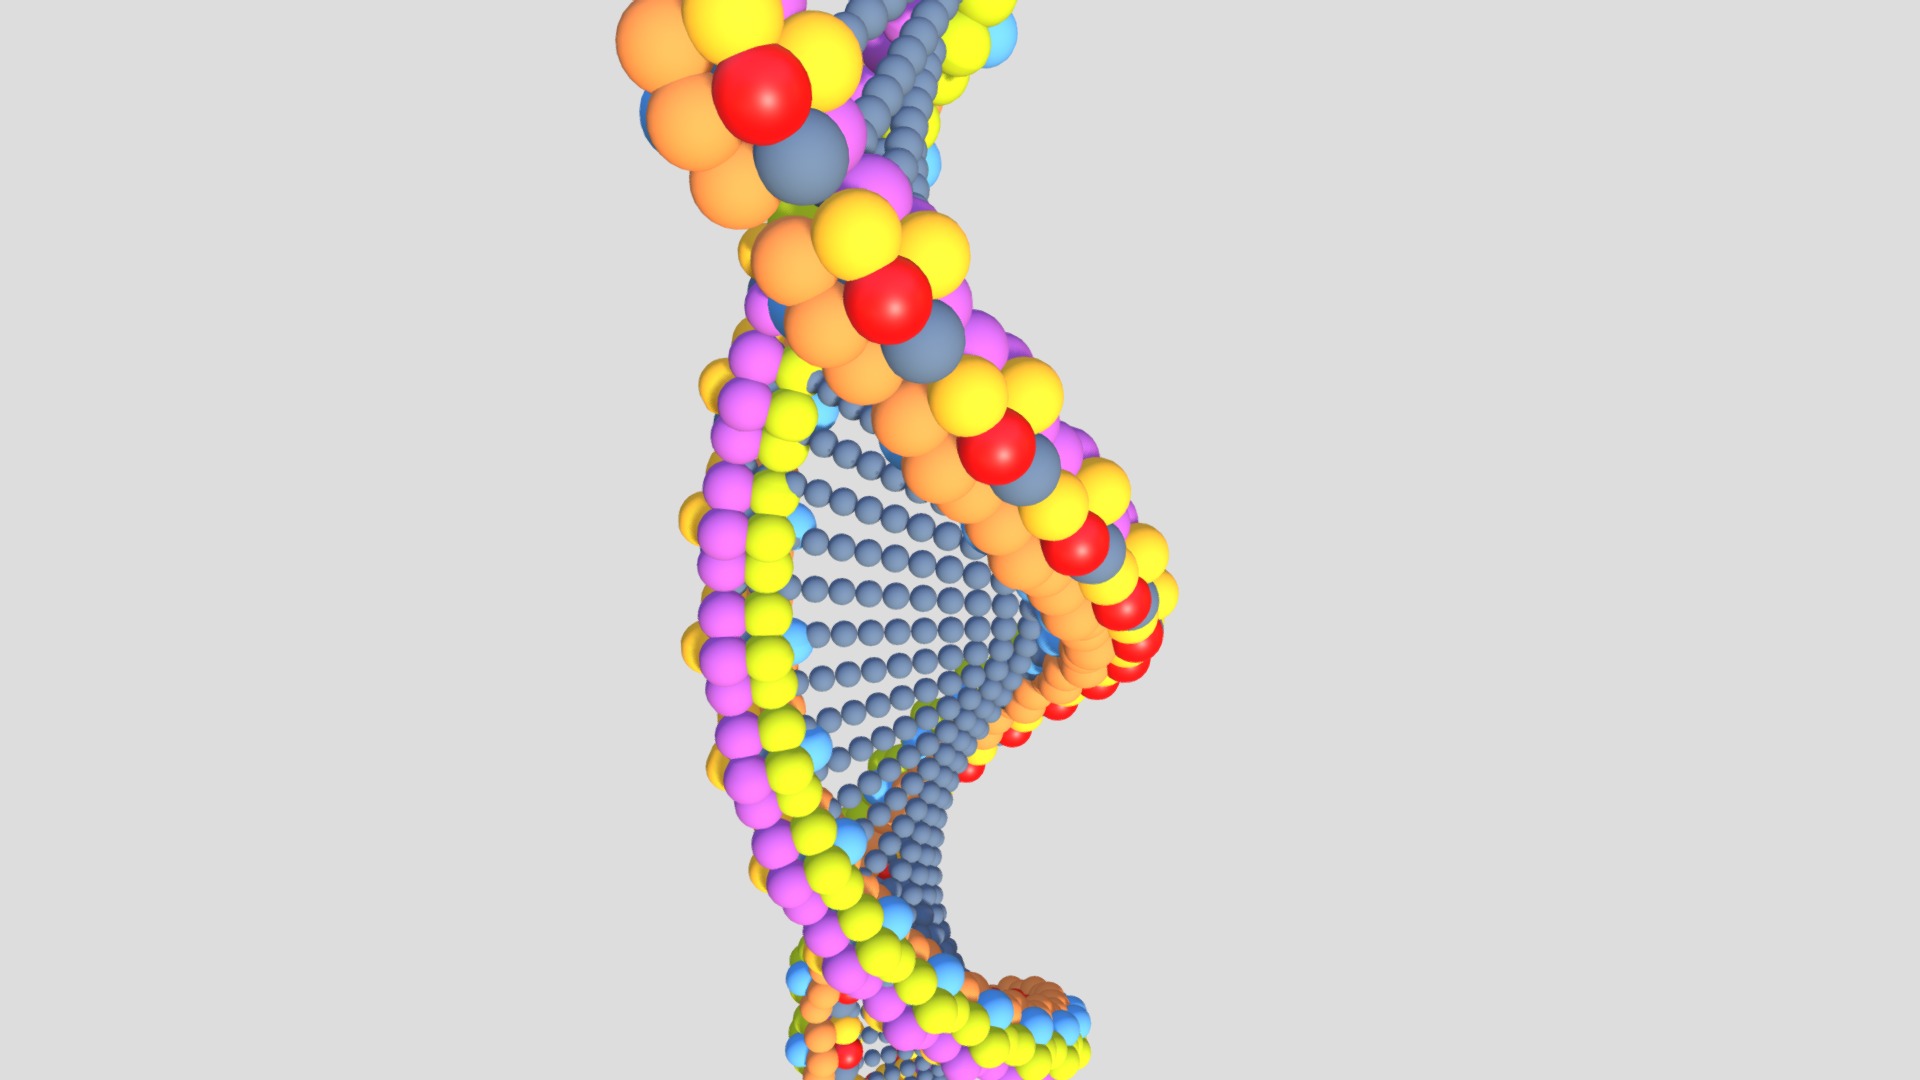 3D model DNA 01 - This is a 3D model of the DNA 01. The 3D model is about a colorful balloon made of balloons.